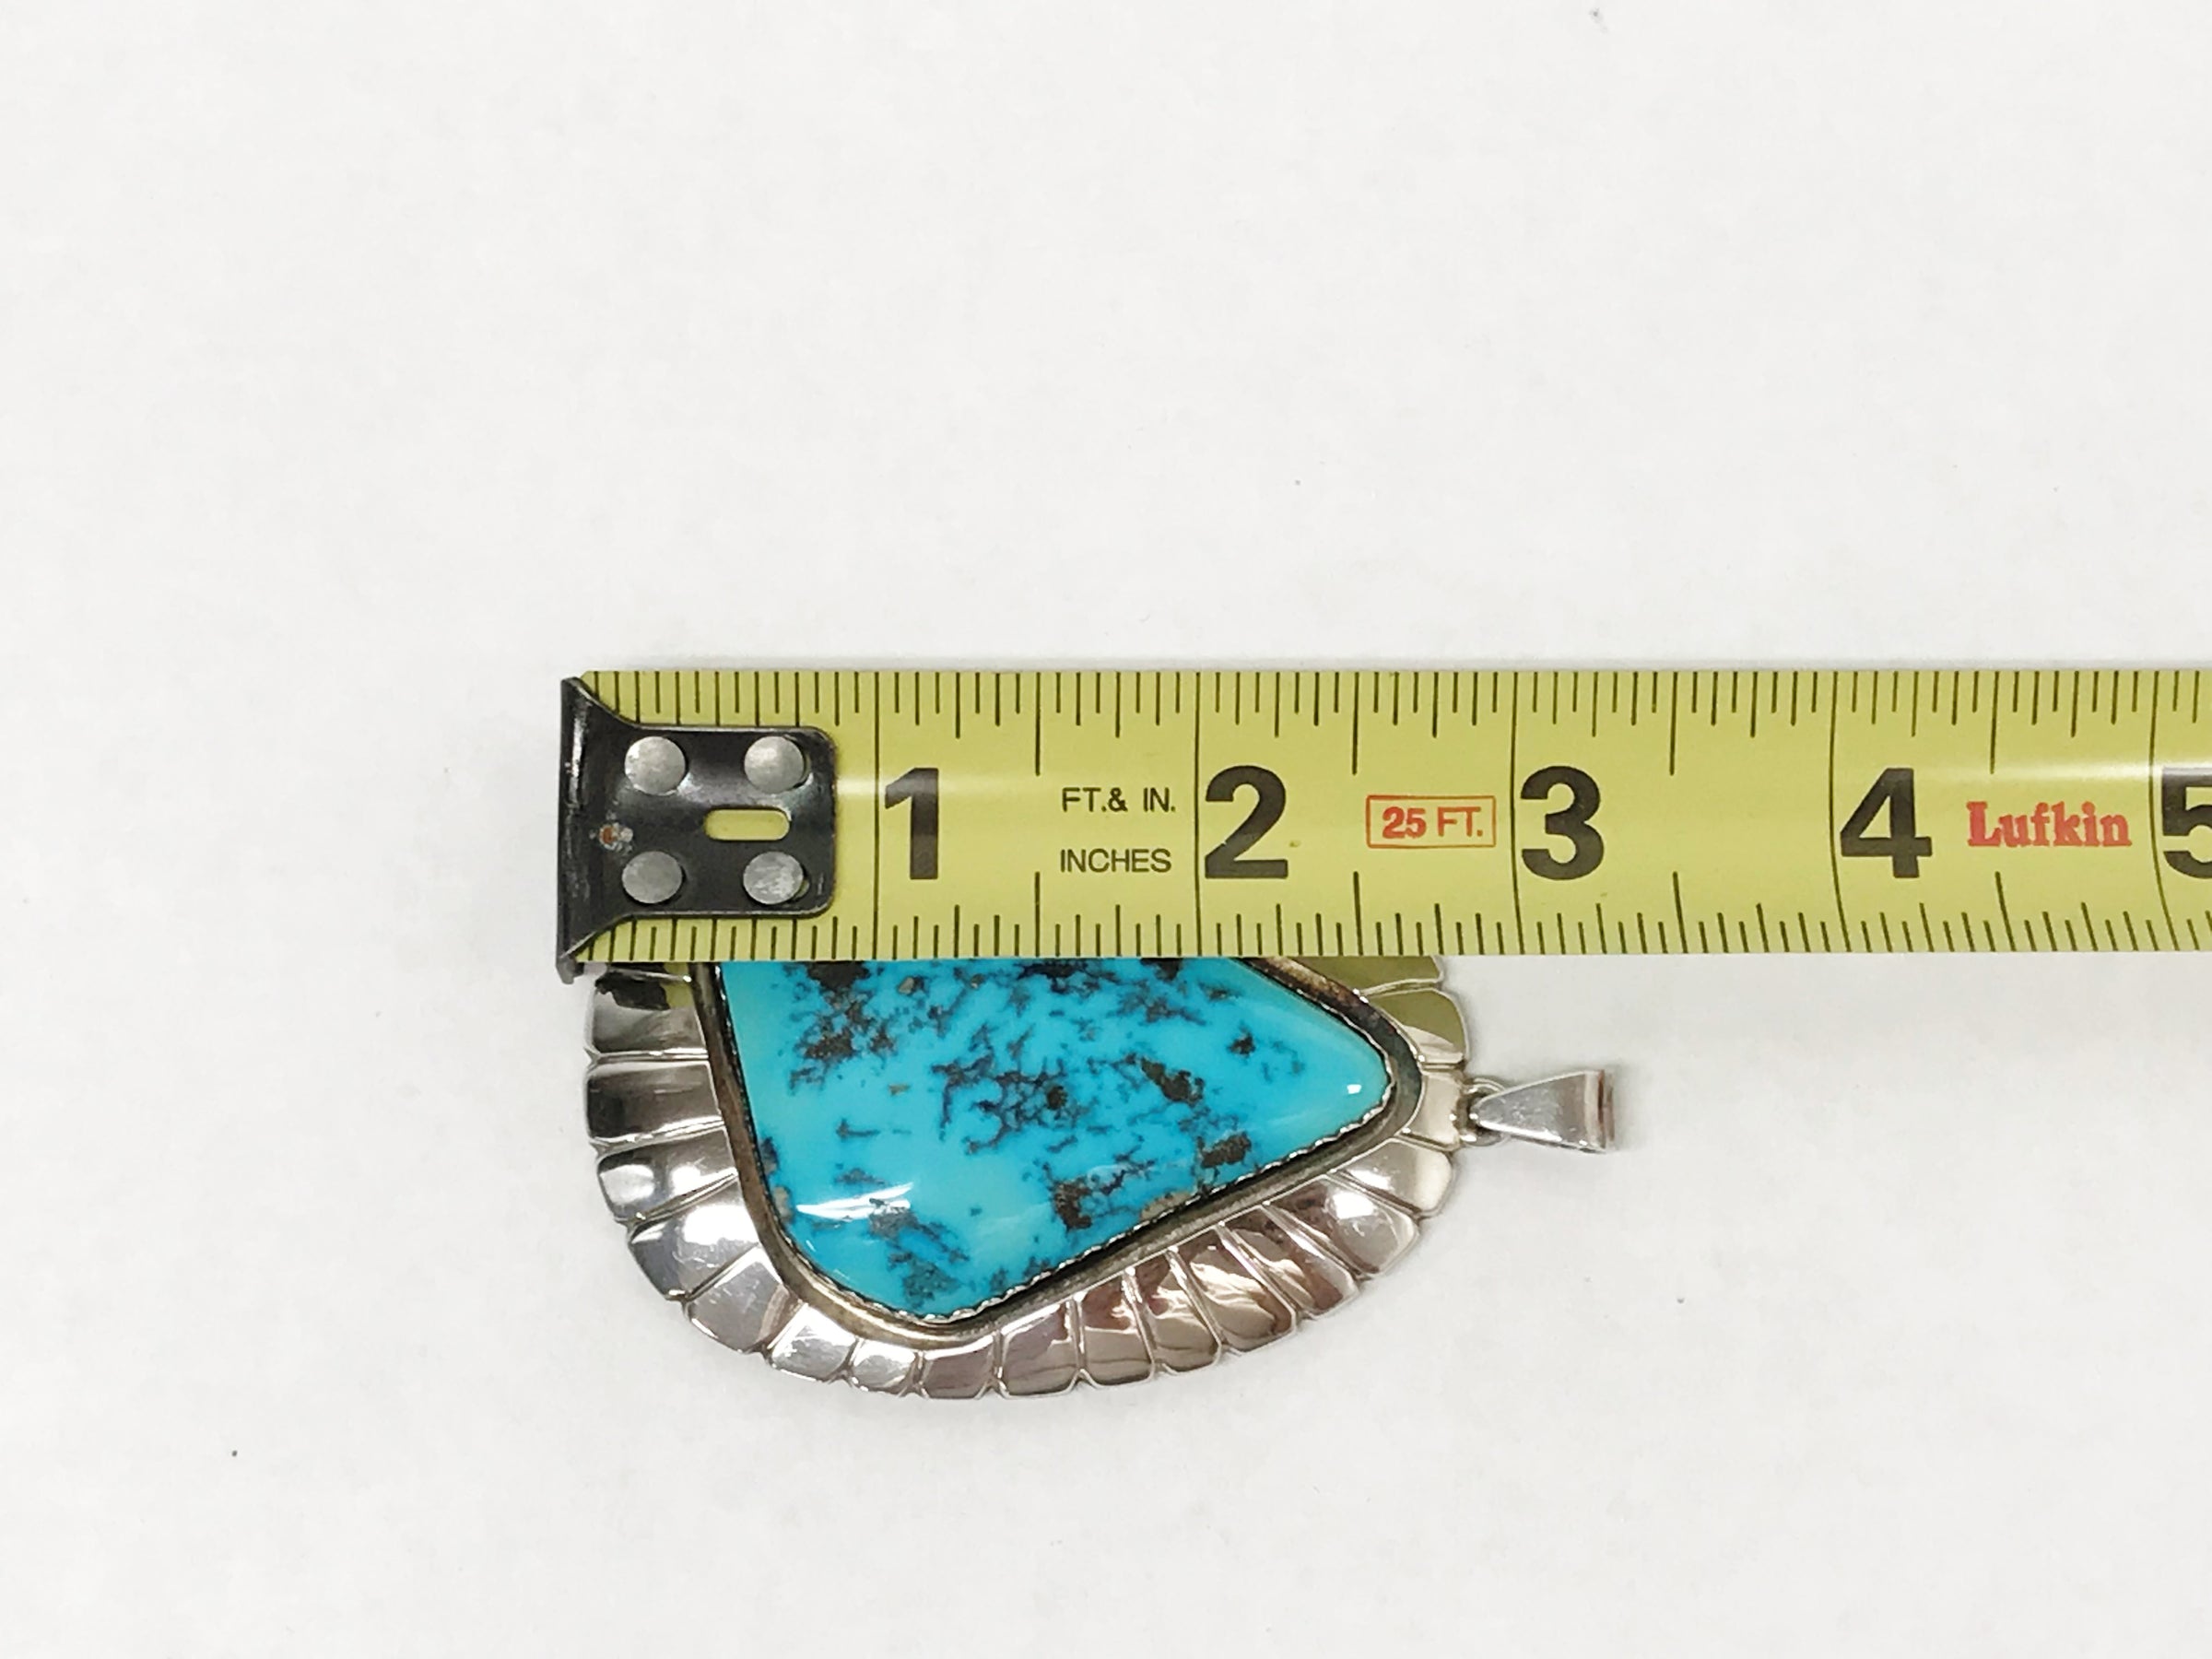 www.hersandhistreasures.com/products/c-j-nez-chester-nez-large-native-american-turquoise-sterling-silver-pendant